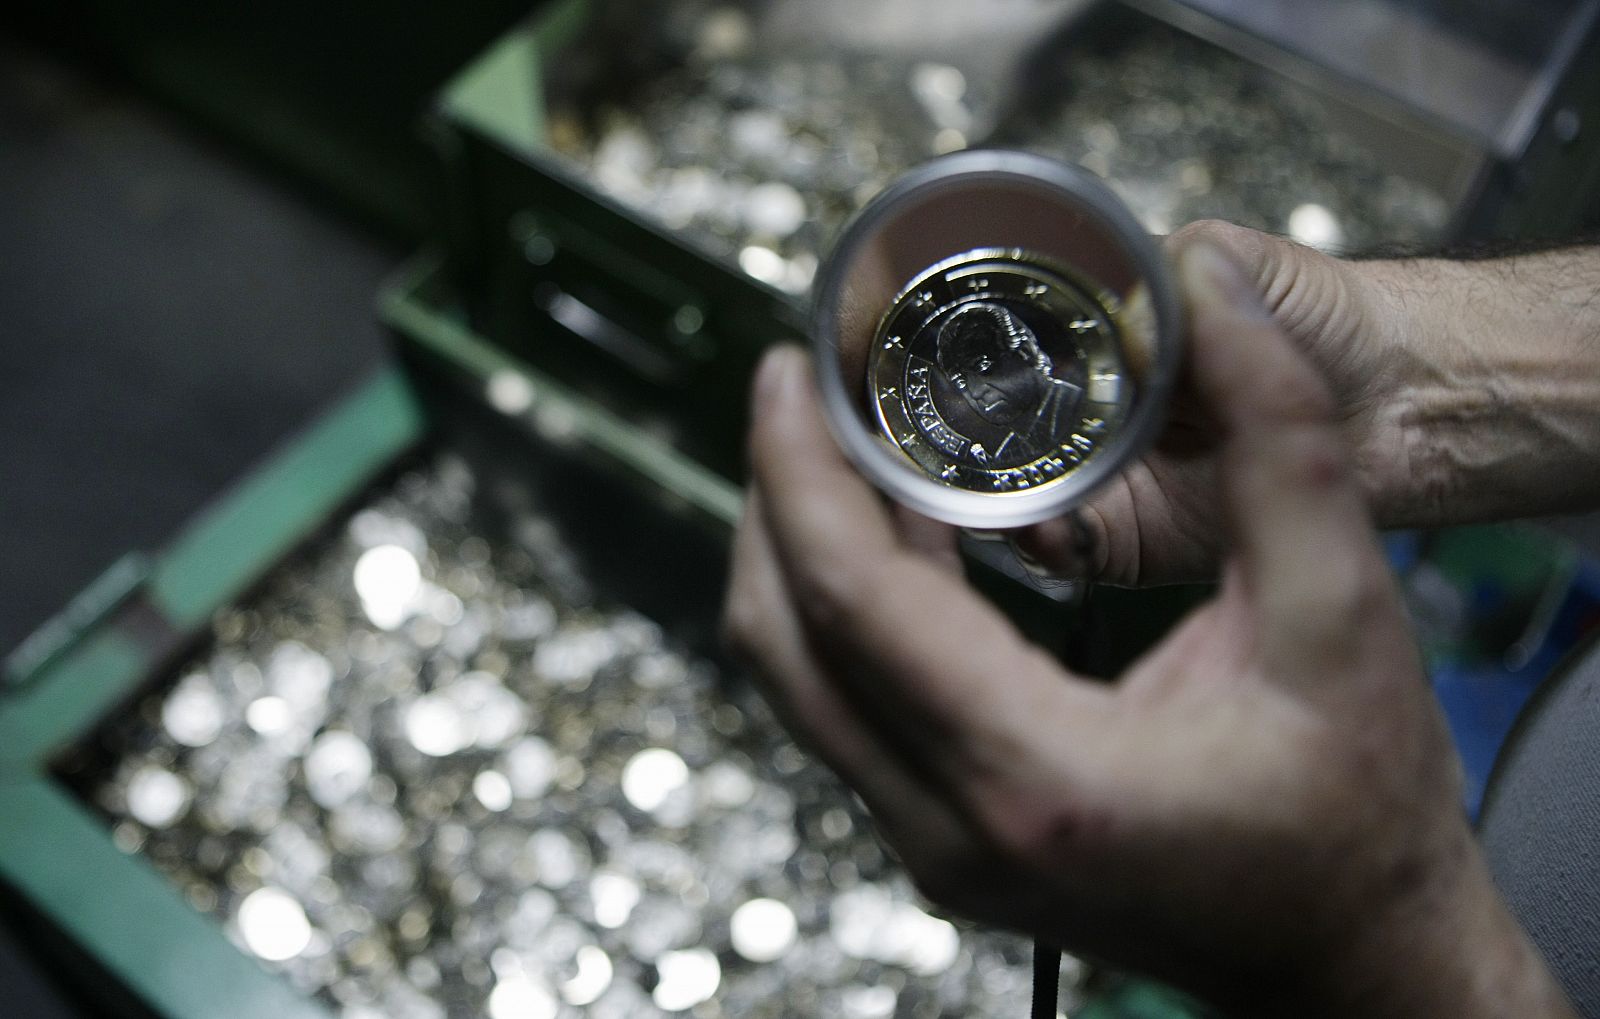 A mint worker displays a 1 euro coin mould depicting Spanish King Juan Carlos with a magnifying glass in Madrid